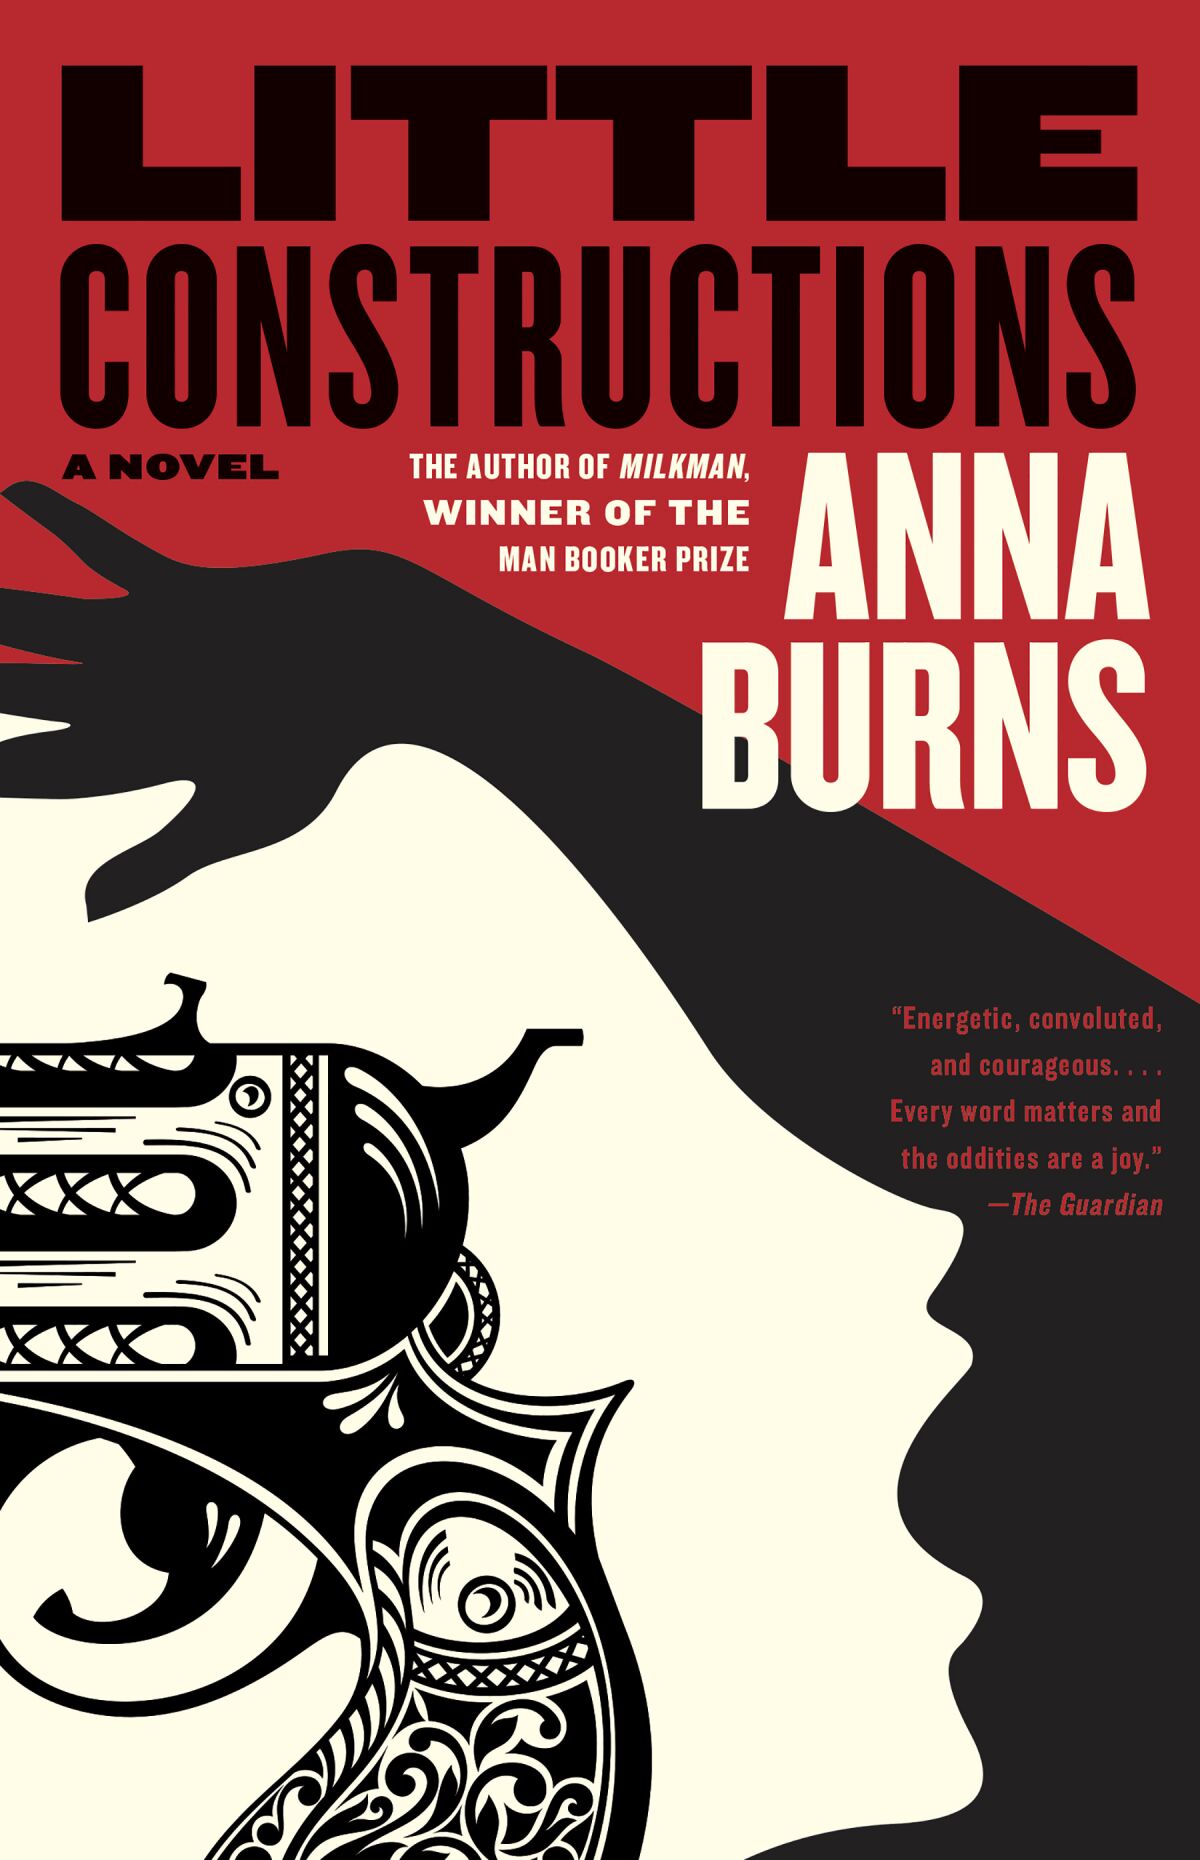 A book jacket for “Little Constructions,” by Anna Burns. 